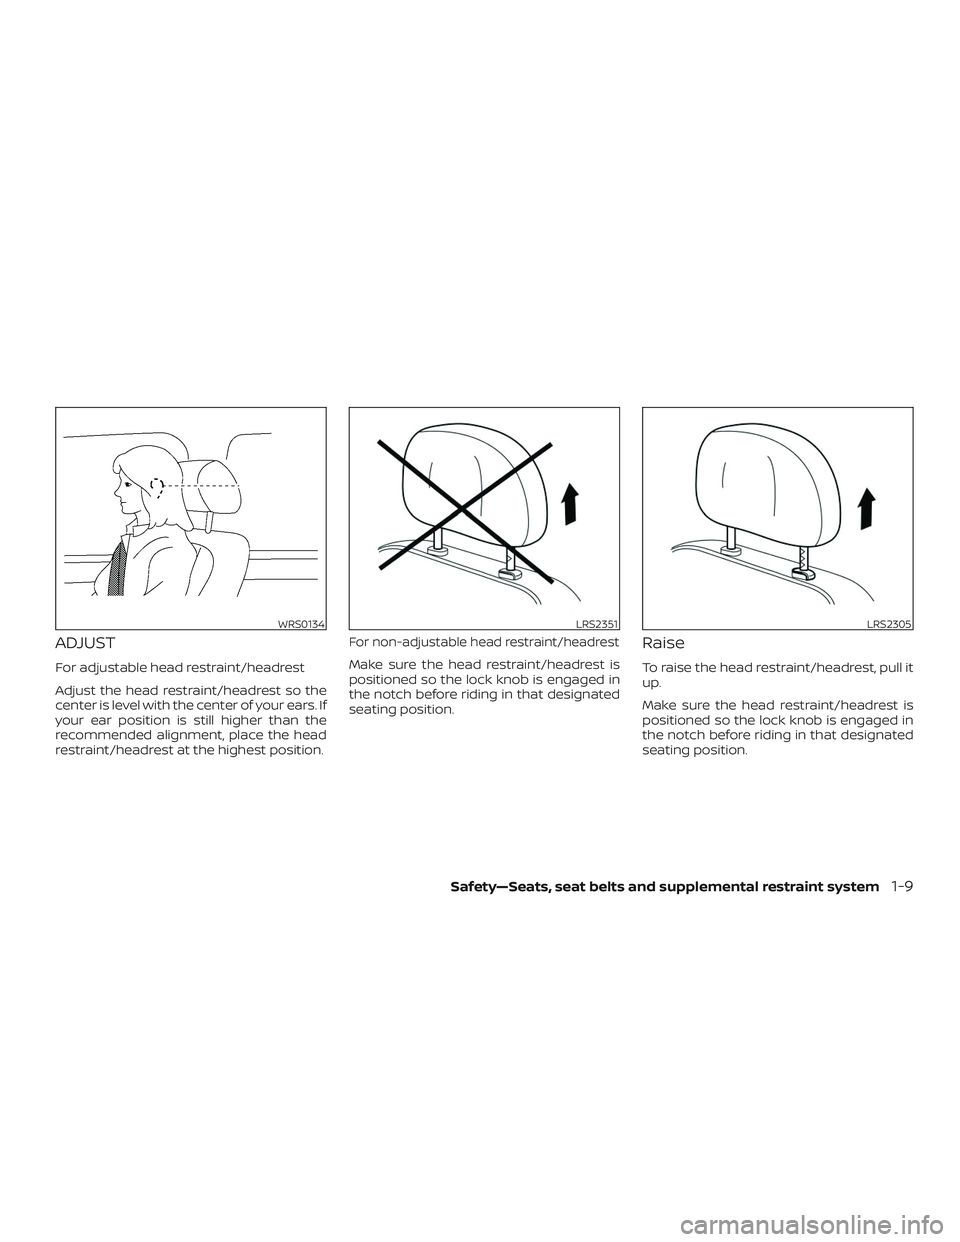 NISSAN MICRA 2019  Owner´s Manual ADJUST
For adjustable head restraint/headrest
Adjust the head restraint/headrest so the
center is level with the center of your ears. If
your ear position is still higher than the
recommended alignmen